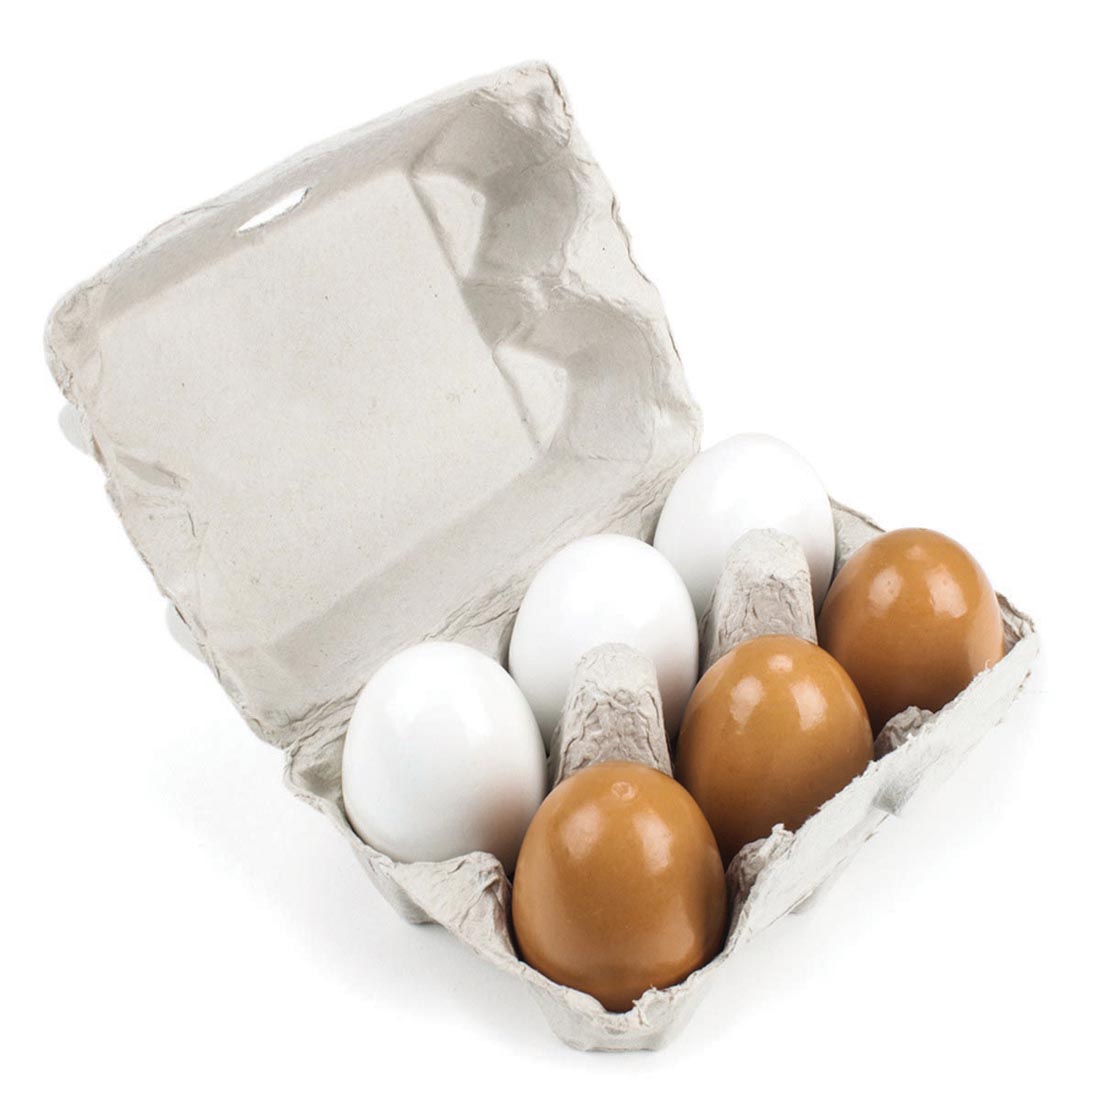 Three White and Three Brown Wooden Eggs in Carton